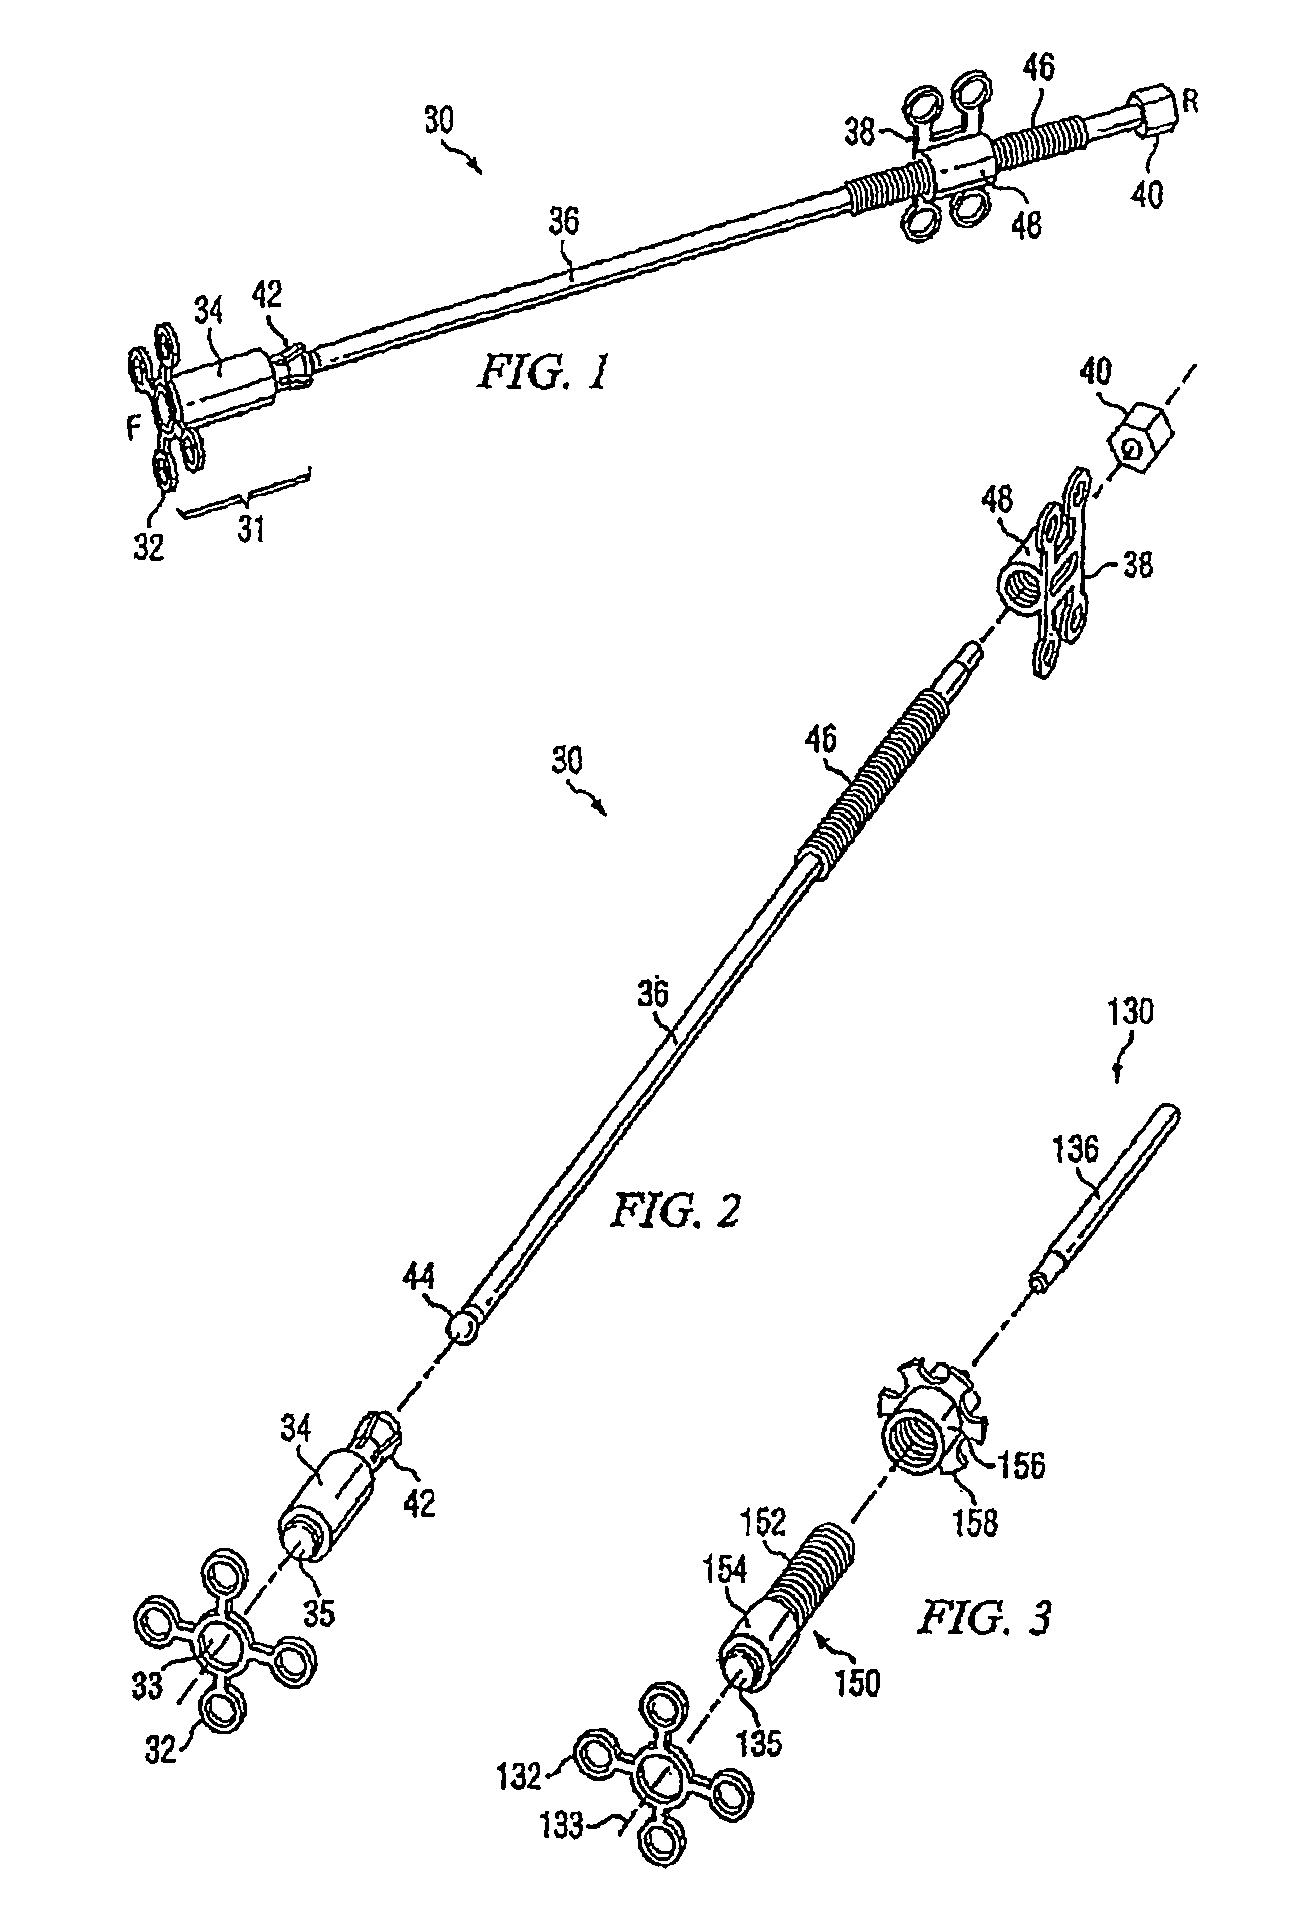 Method and system for facial osteodistraction using a cannulated device